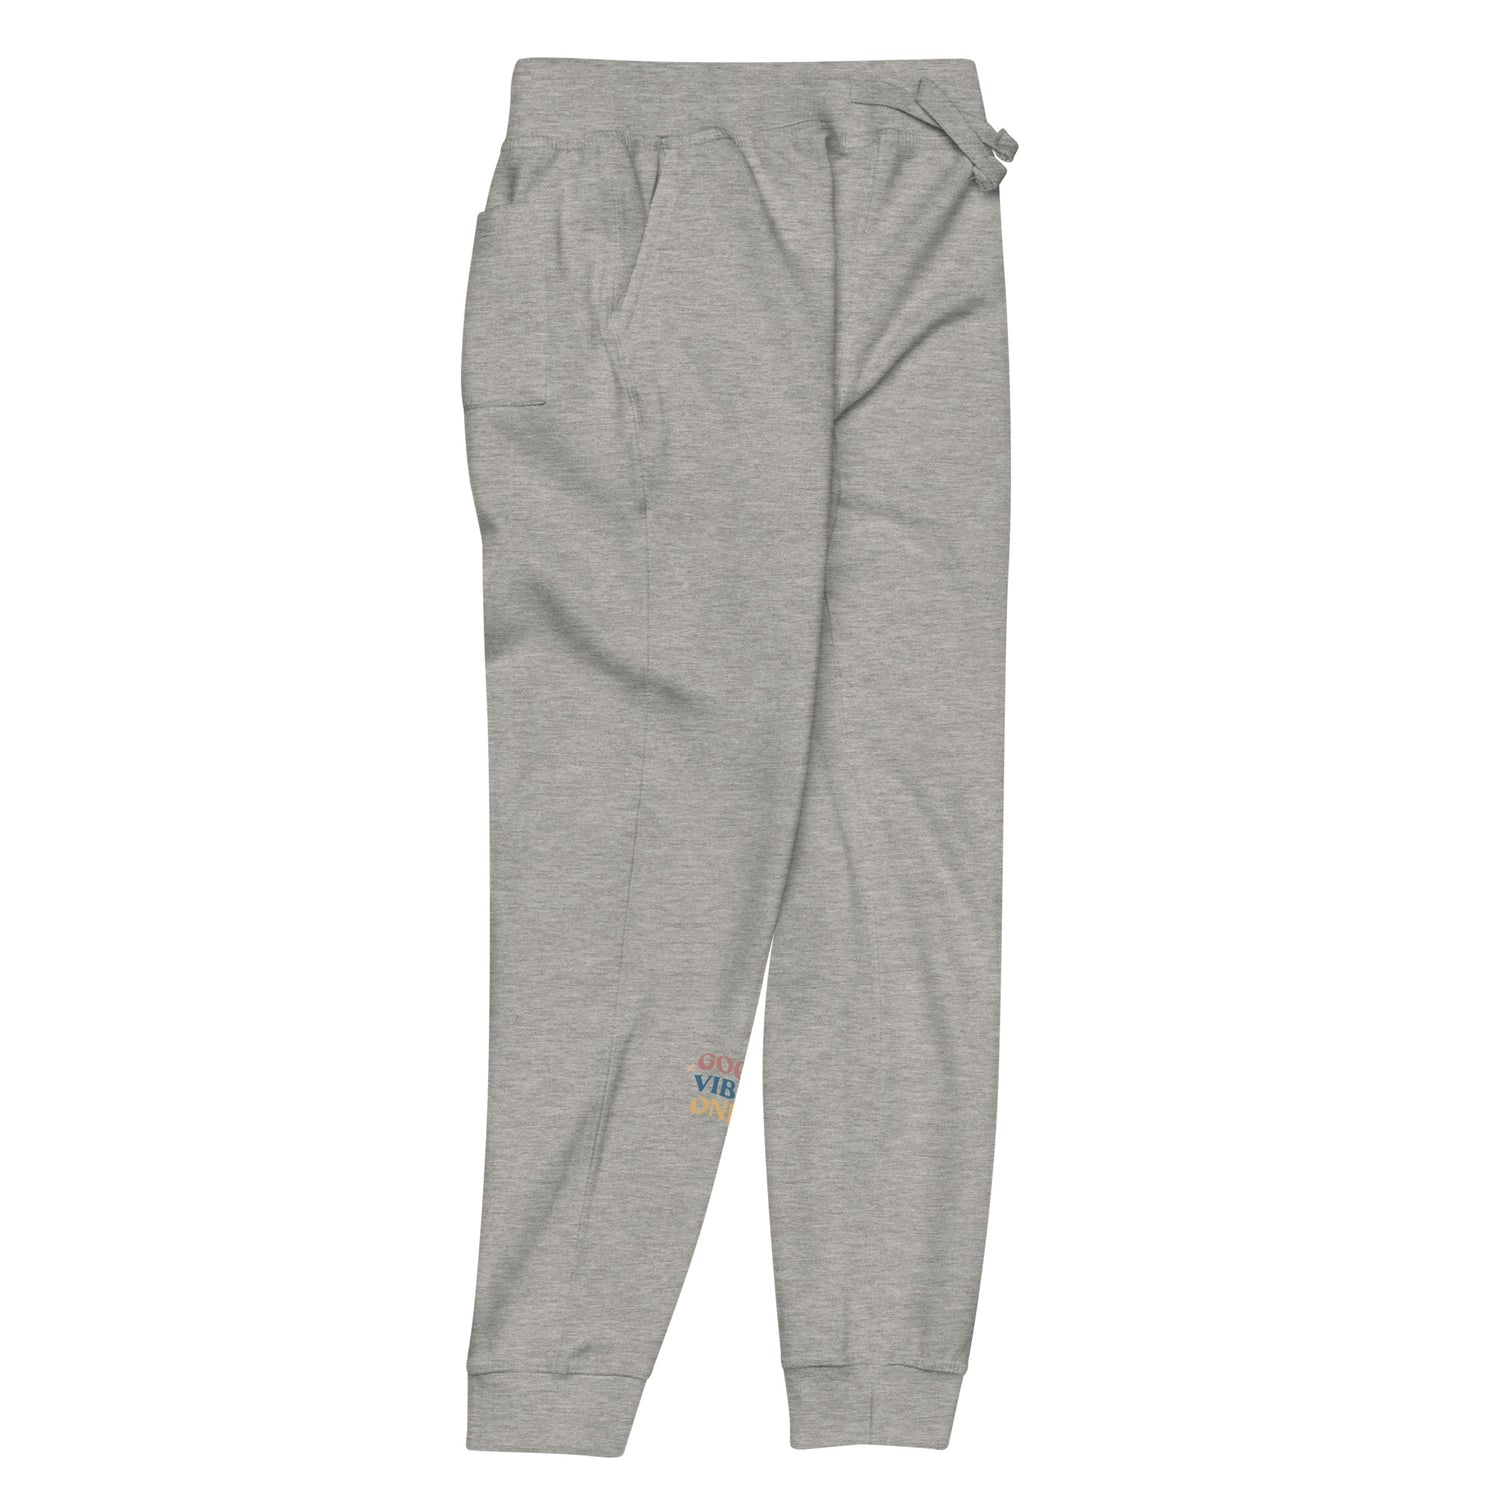 Front- right of full length grey sweat pant with pockets on side, featuring "Good vibes only" printed on right lower leg.